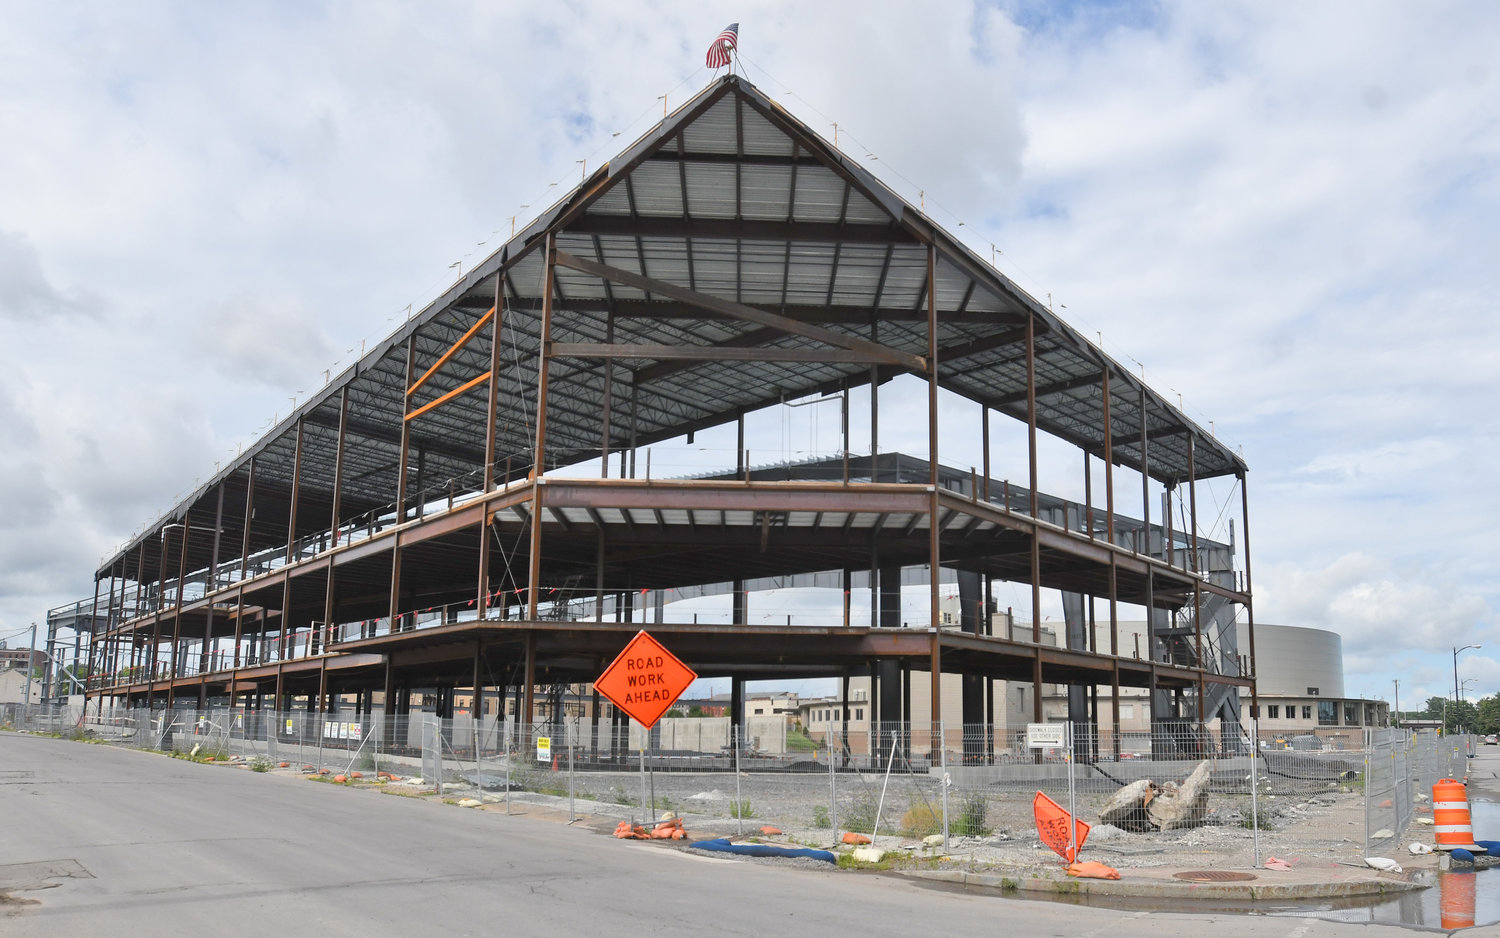 MOVING FORWARD — While construction remains paused on the tournament-sports complex known as the Nexus Center on Oriskany Street in Utica, work on the 170,000-square foot, $40 million building that is to have venues for sports tournaments, including hockey, indoor soccer and lacrosse, received a boost on Wednesday with passage of a resolution by the Oneida County Board of Legislators.